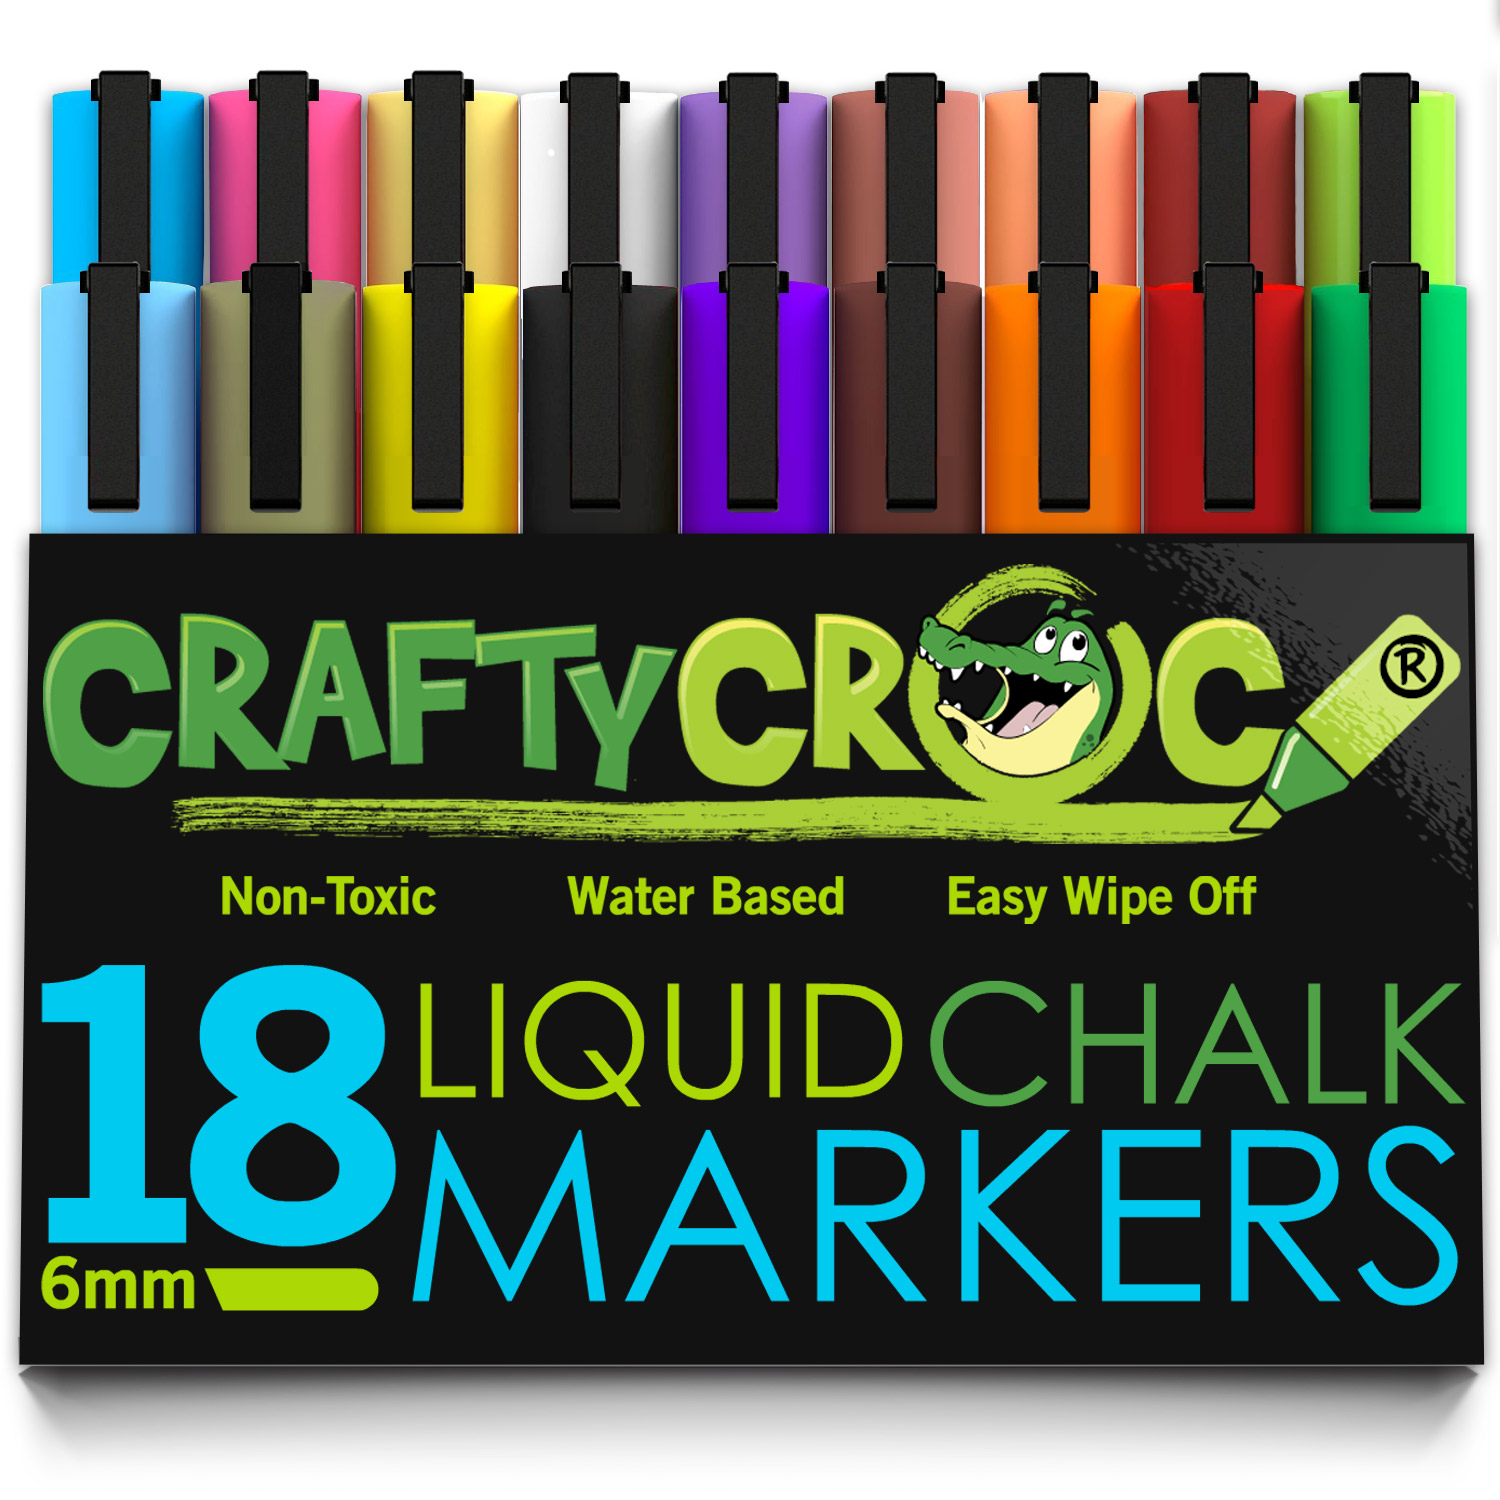 CraftyCroc Liquid Chalk Markers as featured on homelifeabroad.com